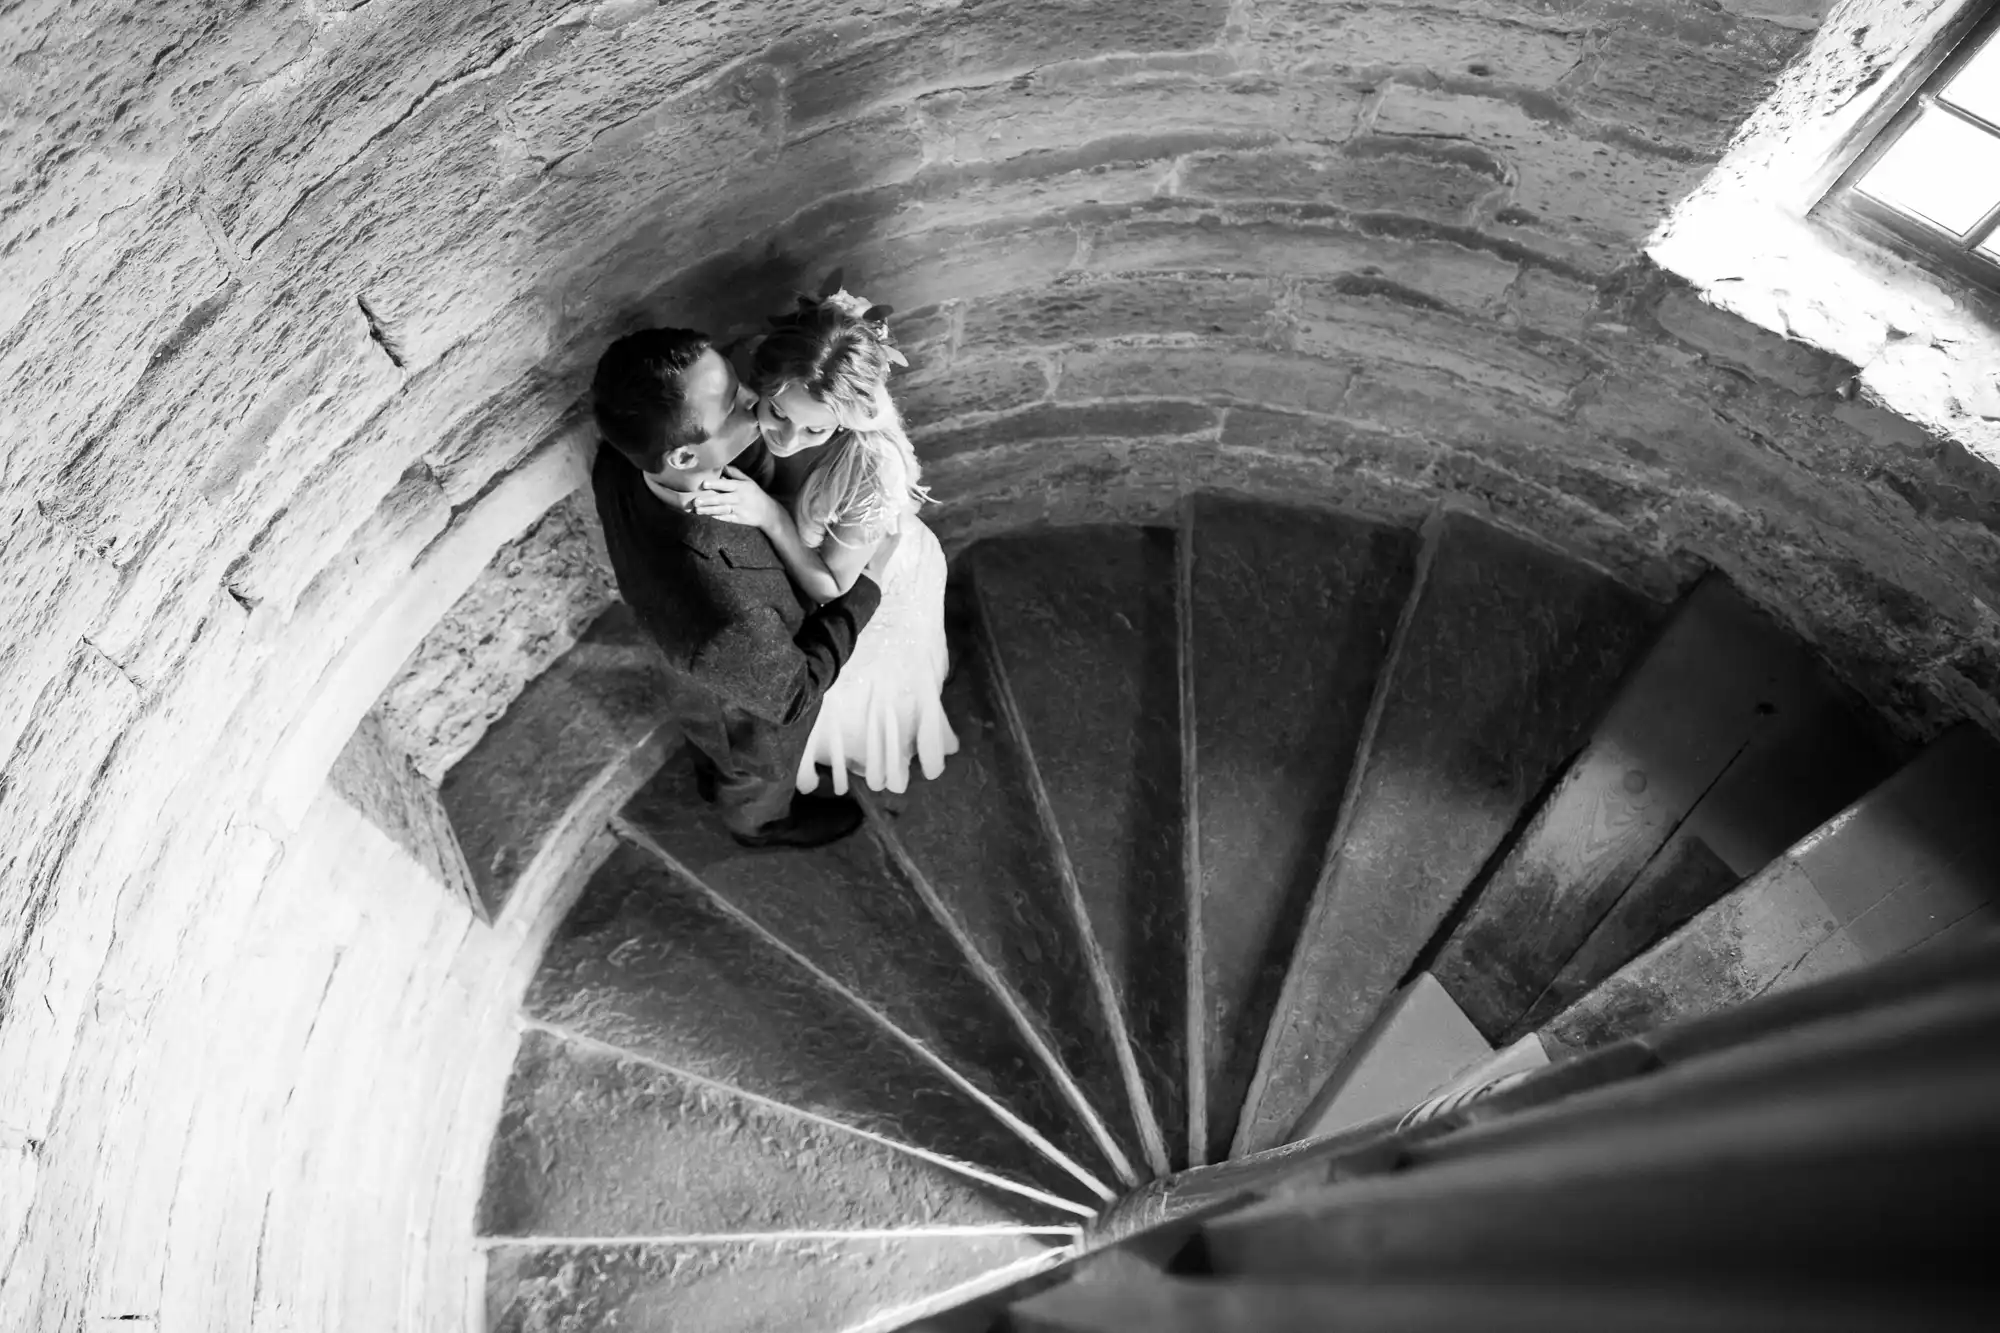 A black and white photo shows a newlywed couple embracing on a spiral staircase, viewed from above. The staircase is made of stone, and sunlight streams in from a small window.